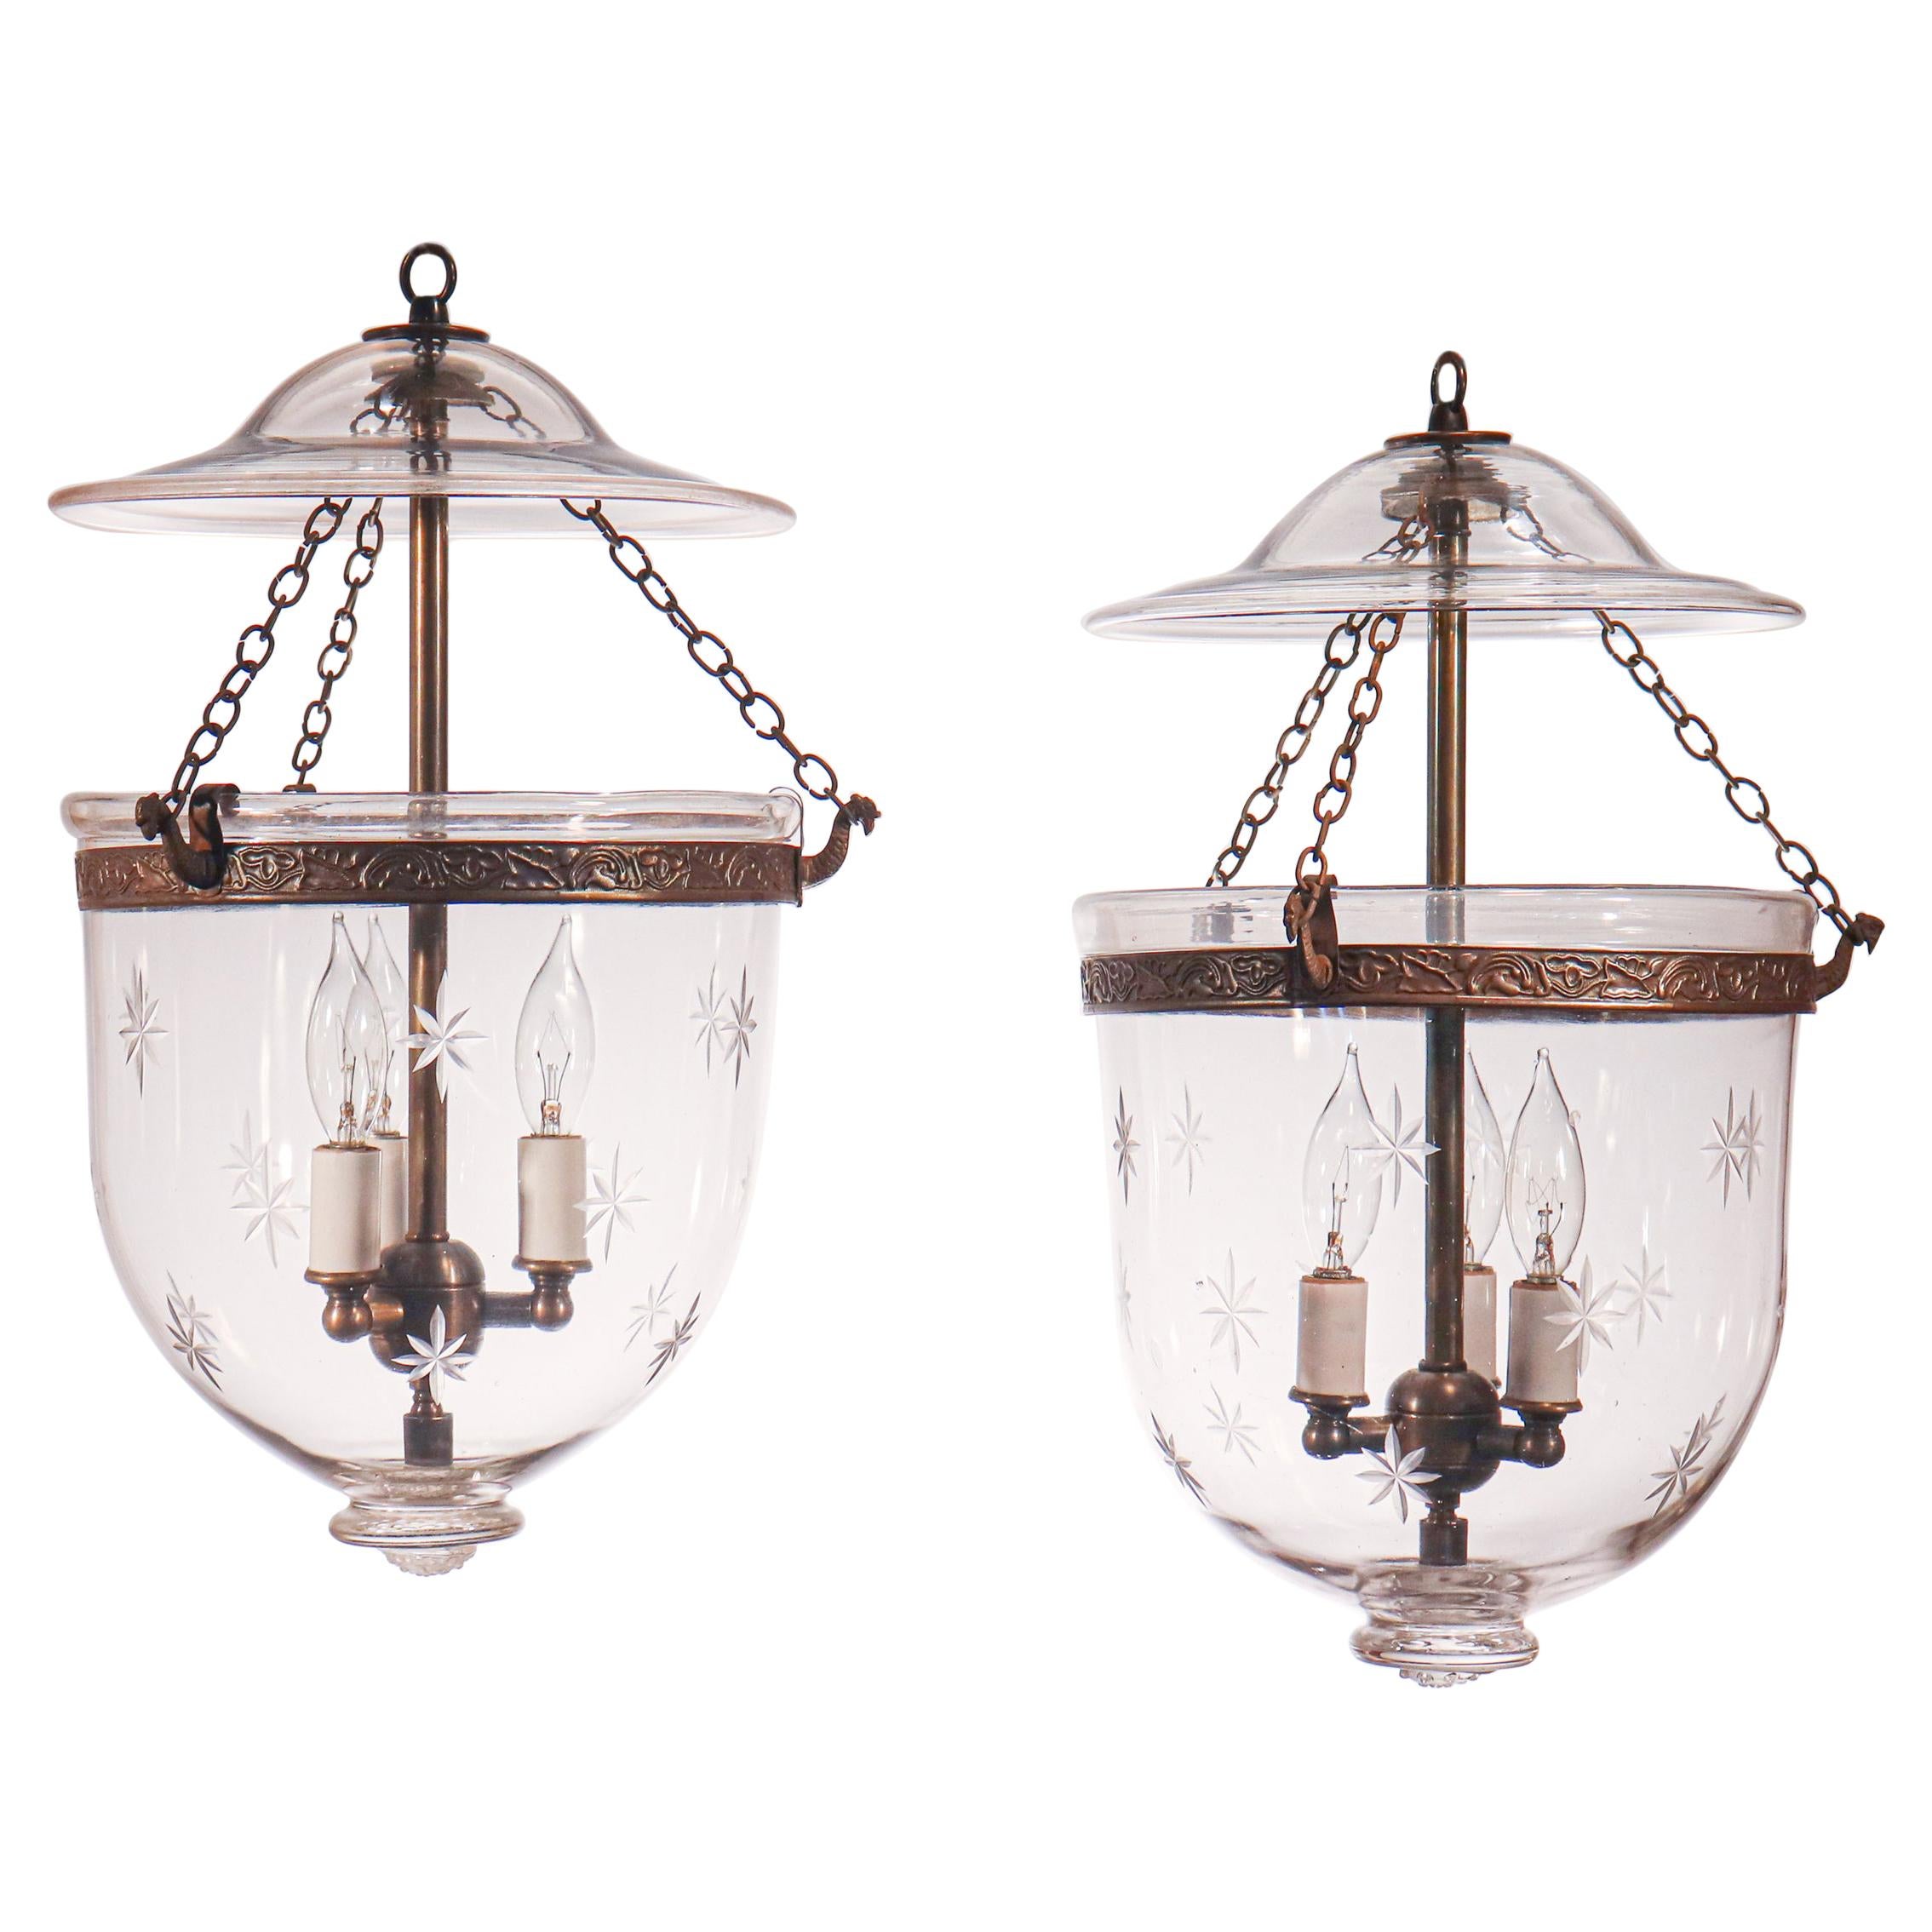 Pair of Antique Bell Jar Lanterns with Etched Stars